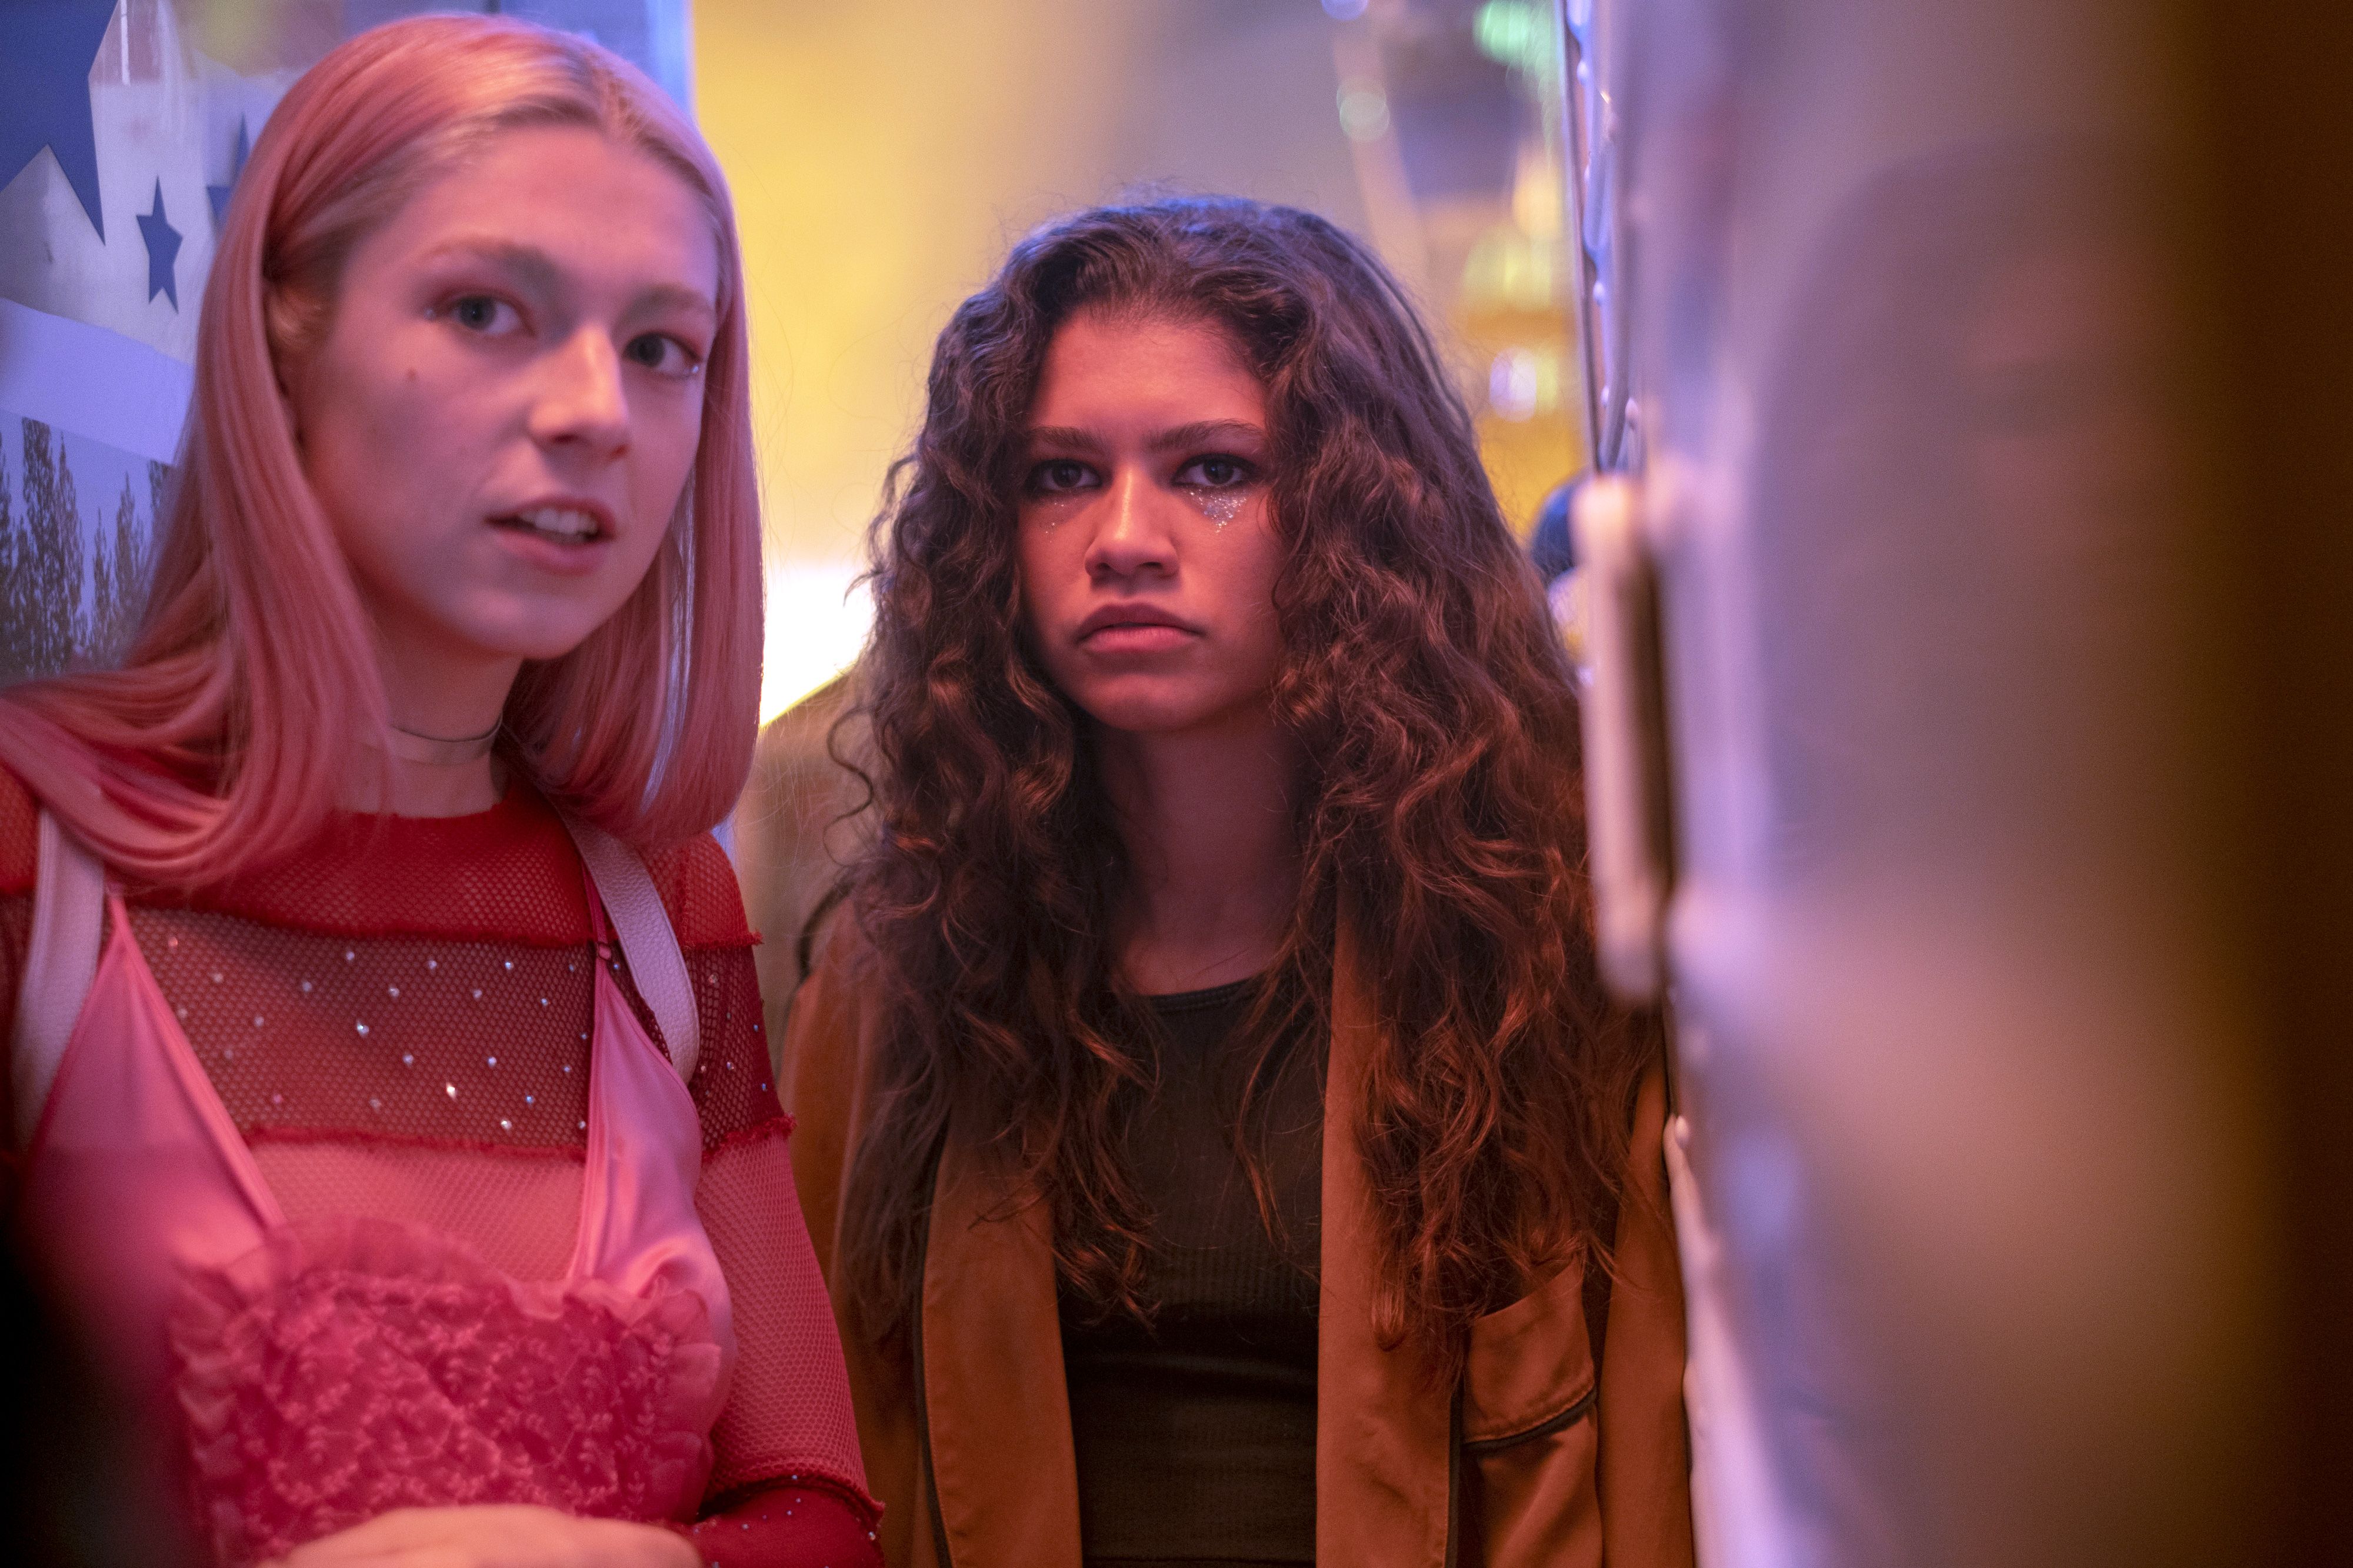 Euphoria Season 3: Major changes to storyline teased, premiere may